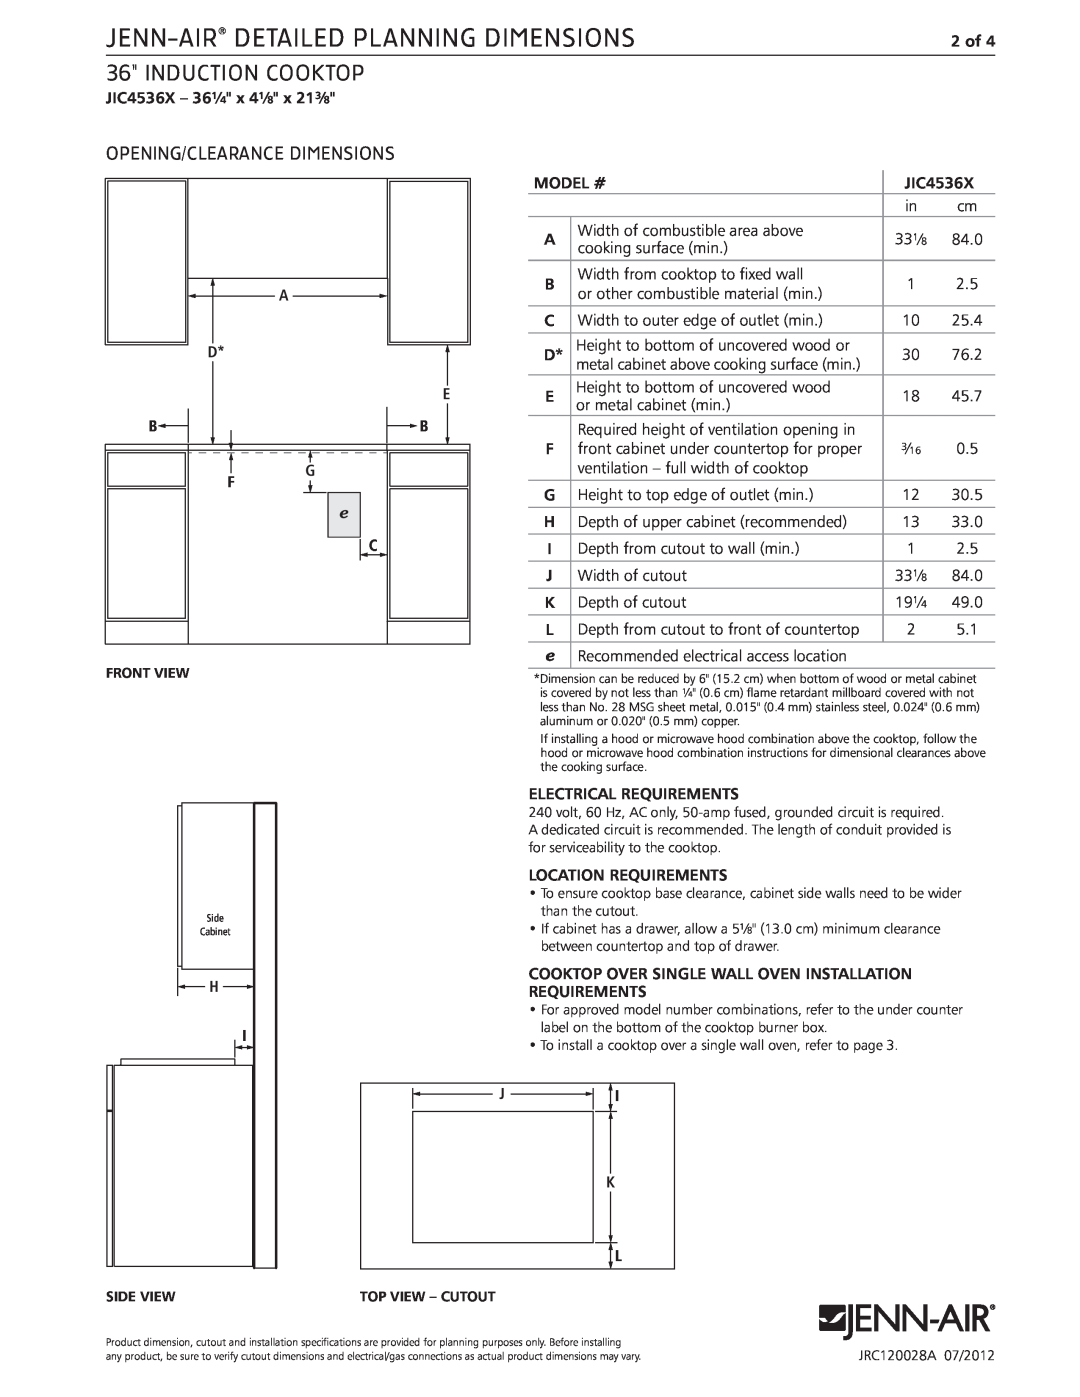 Jenn-Air JIC4536X dimensions Opening/Clearance Dimensions, Jenn-Air Detailed Planning Dimensions, INDUCTION Cooktop 